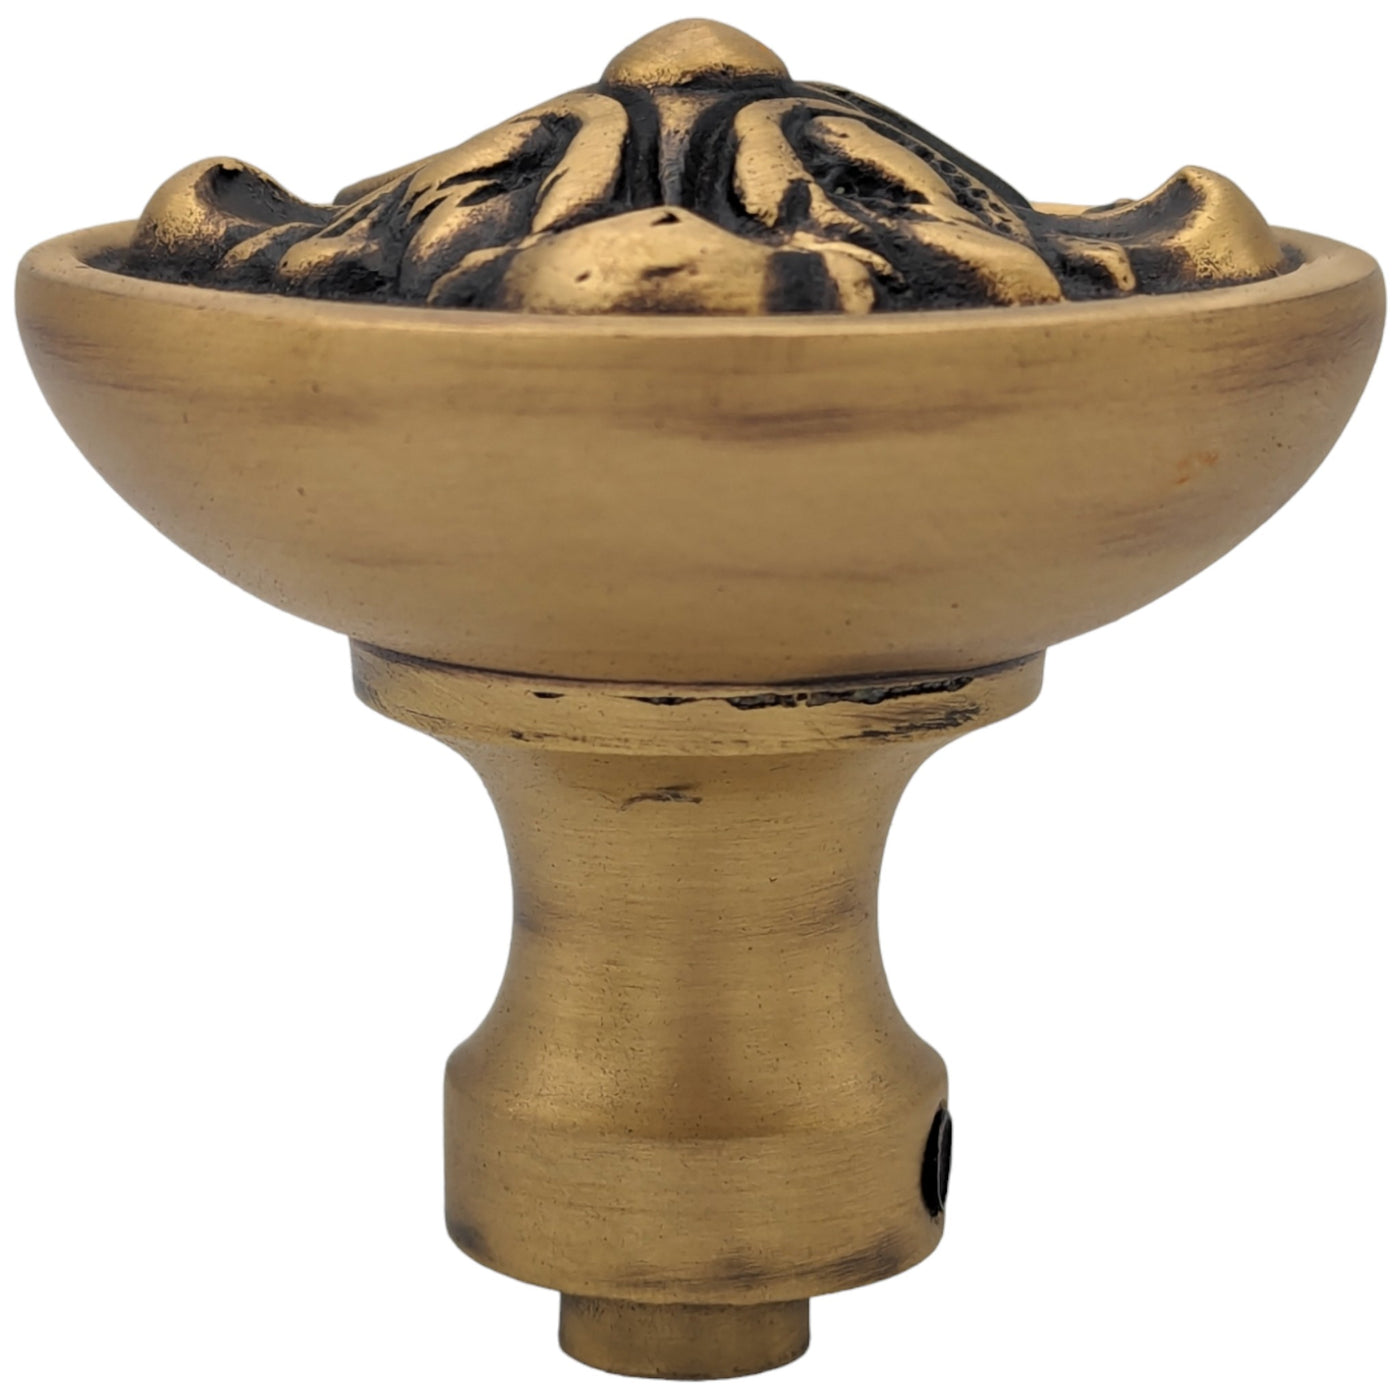 Romanesque Solid Brass Spare Door Knob Set (Several Finishes Available)